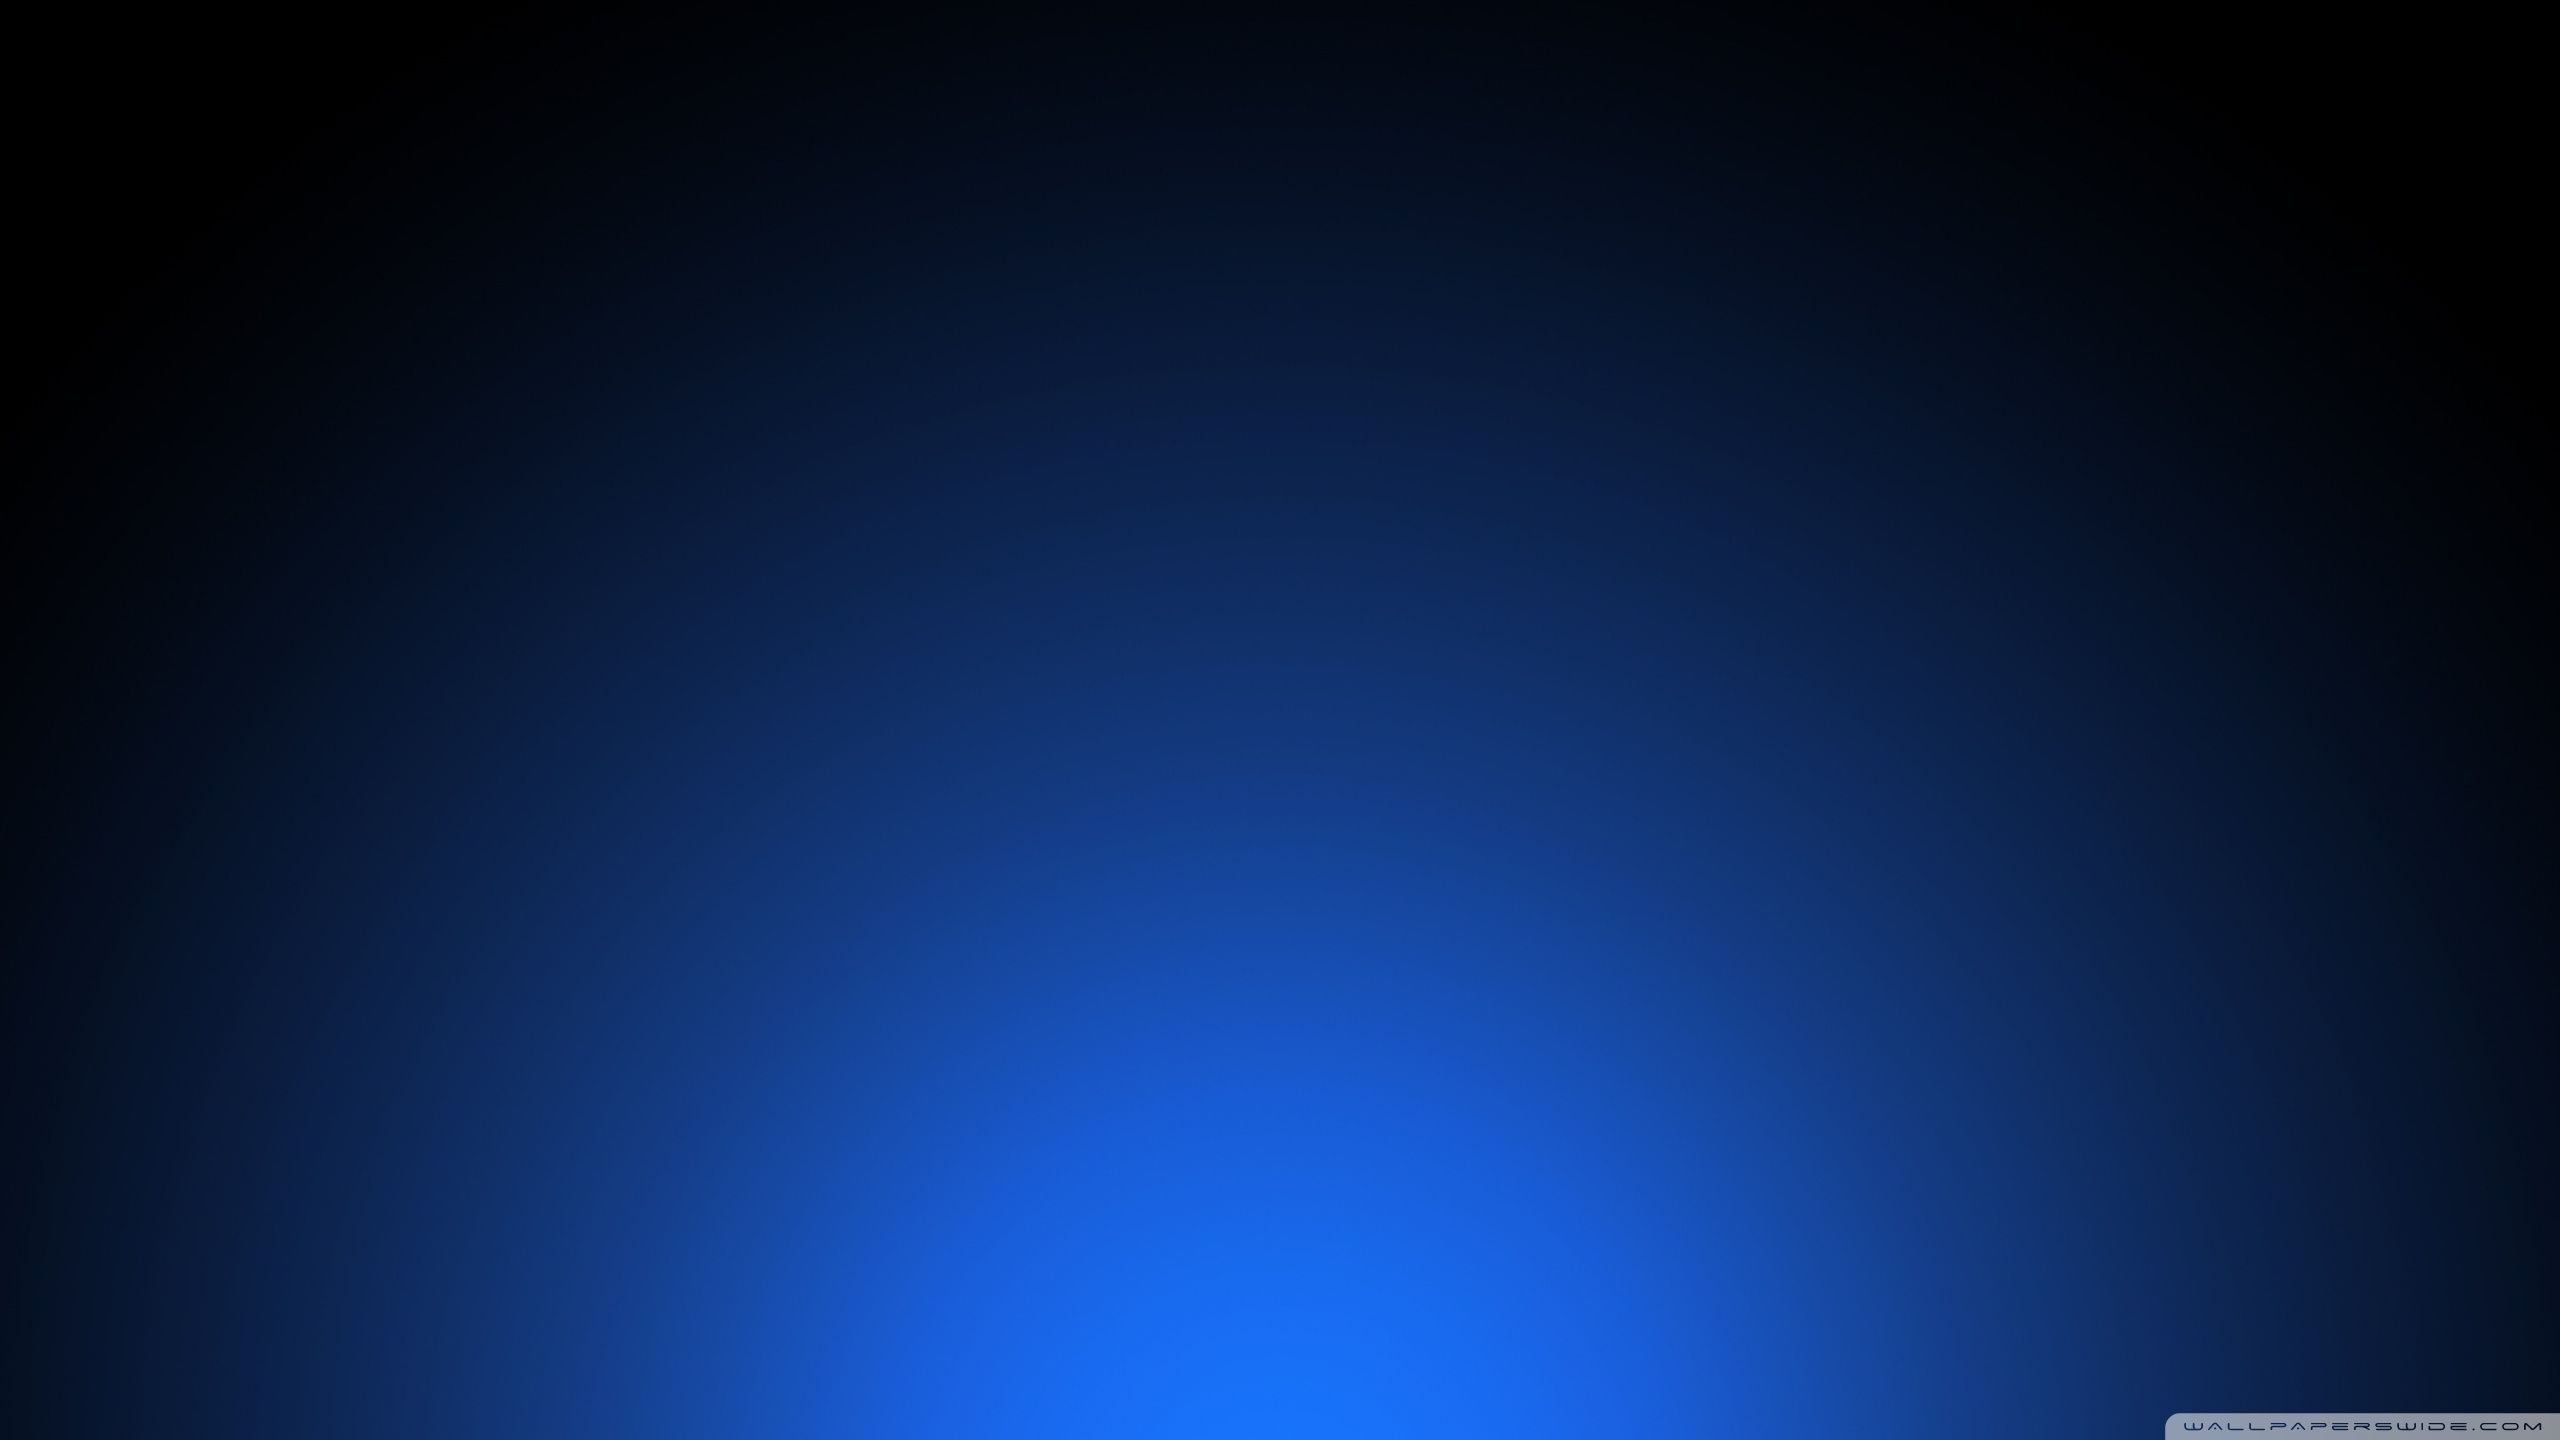 10 New Blue And Black Background FULL HD 1080p For PC Background